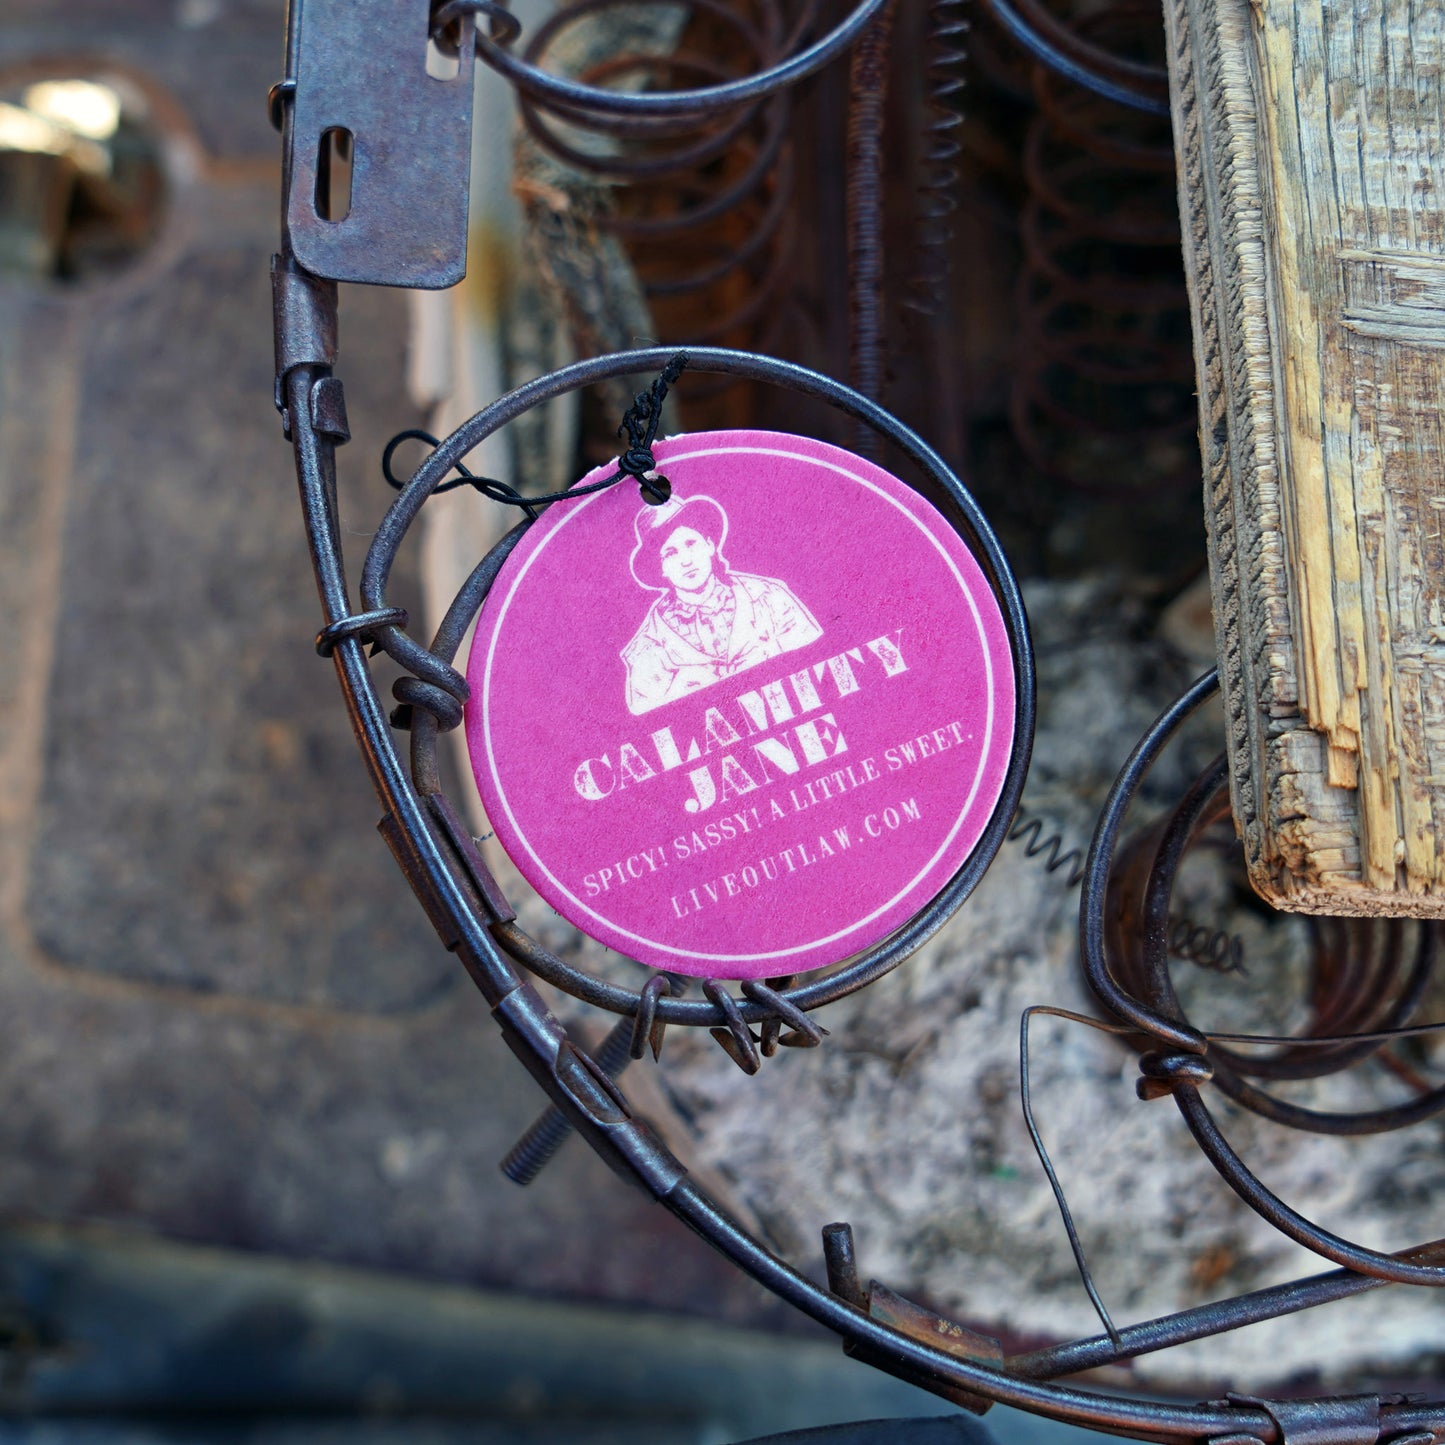 Calamity Jane air freshener from Outlaw